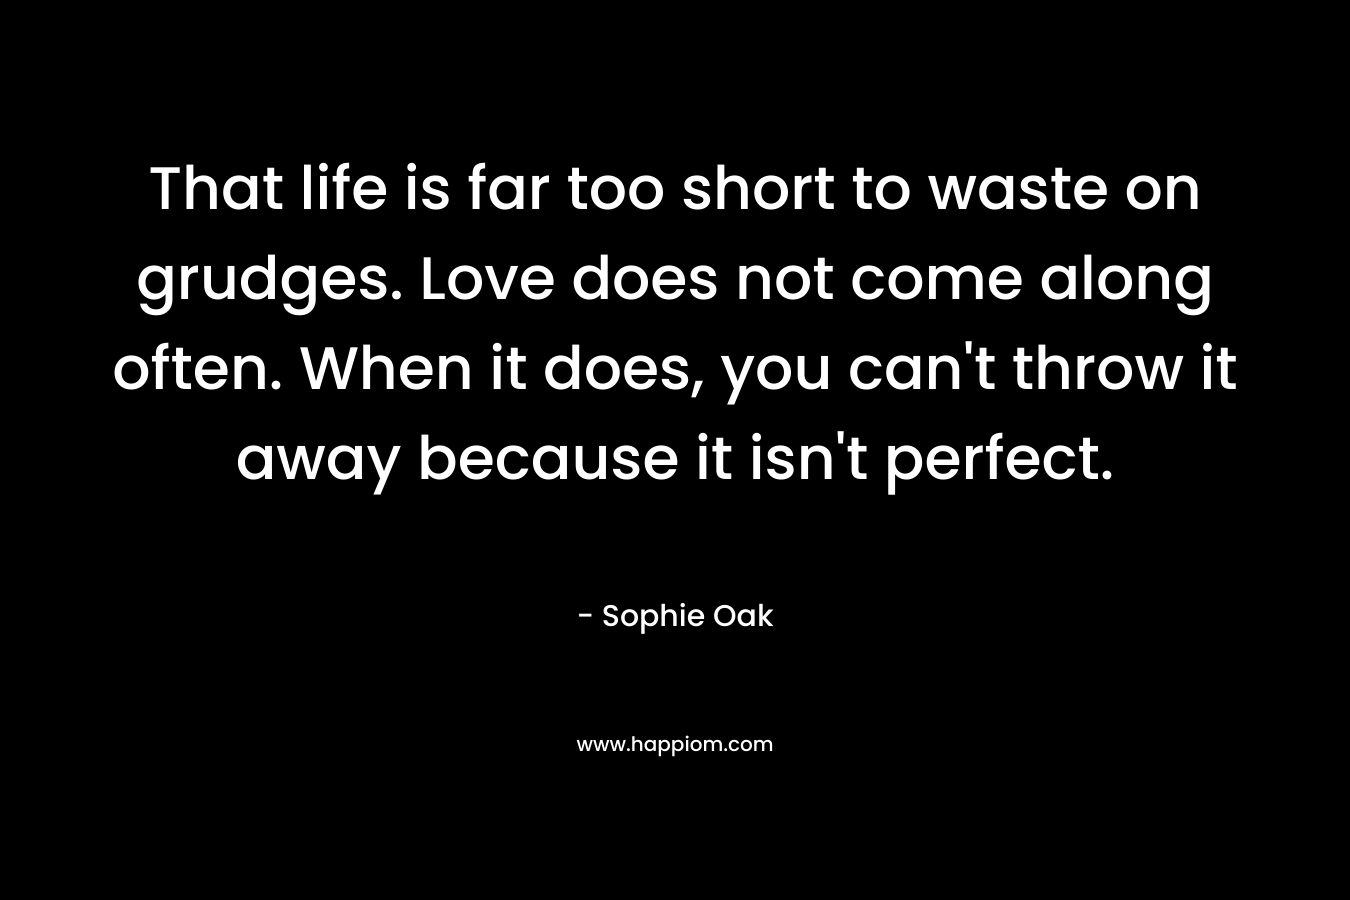 That life is far too short to waste on grudges. Love does not come along often. When it does, you can't throw it away because it isn't perfect.